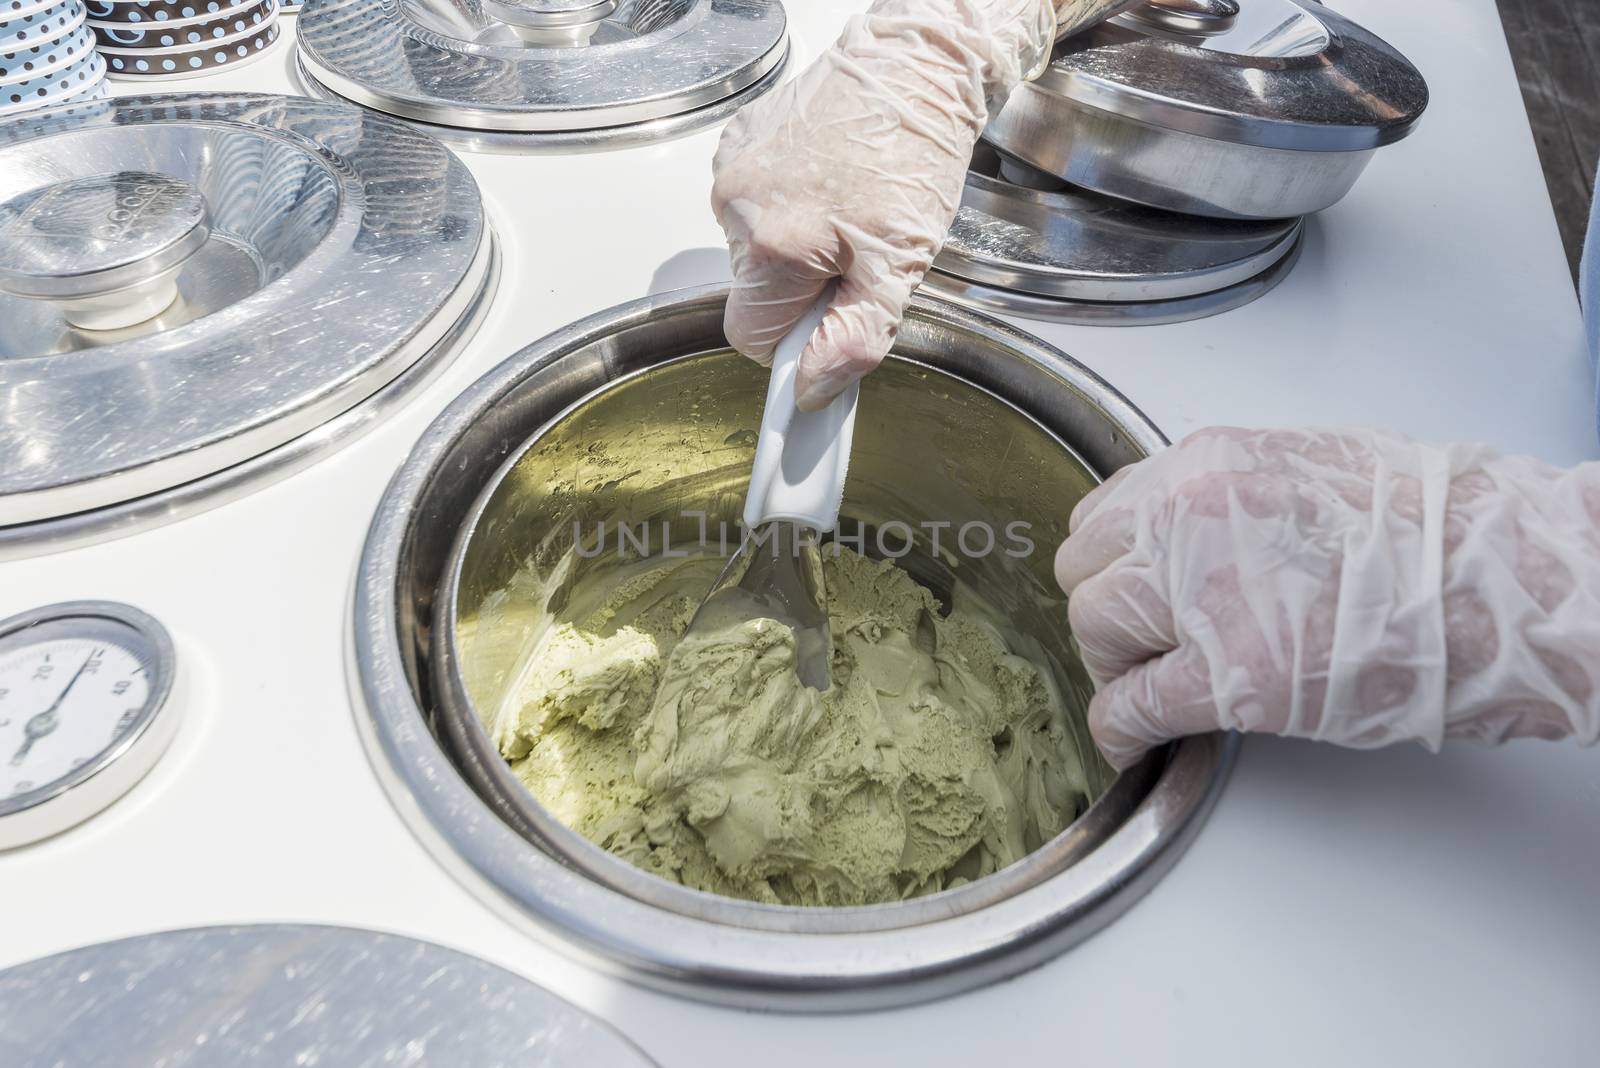 Chef mixing pistachio ice cream by sewer12